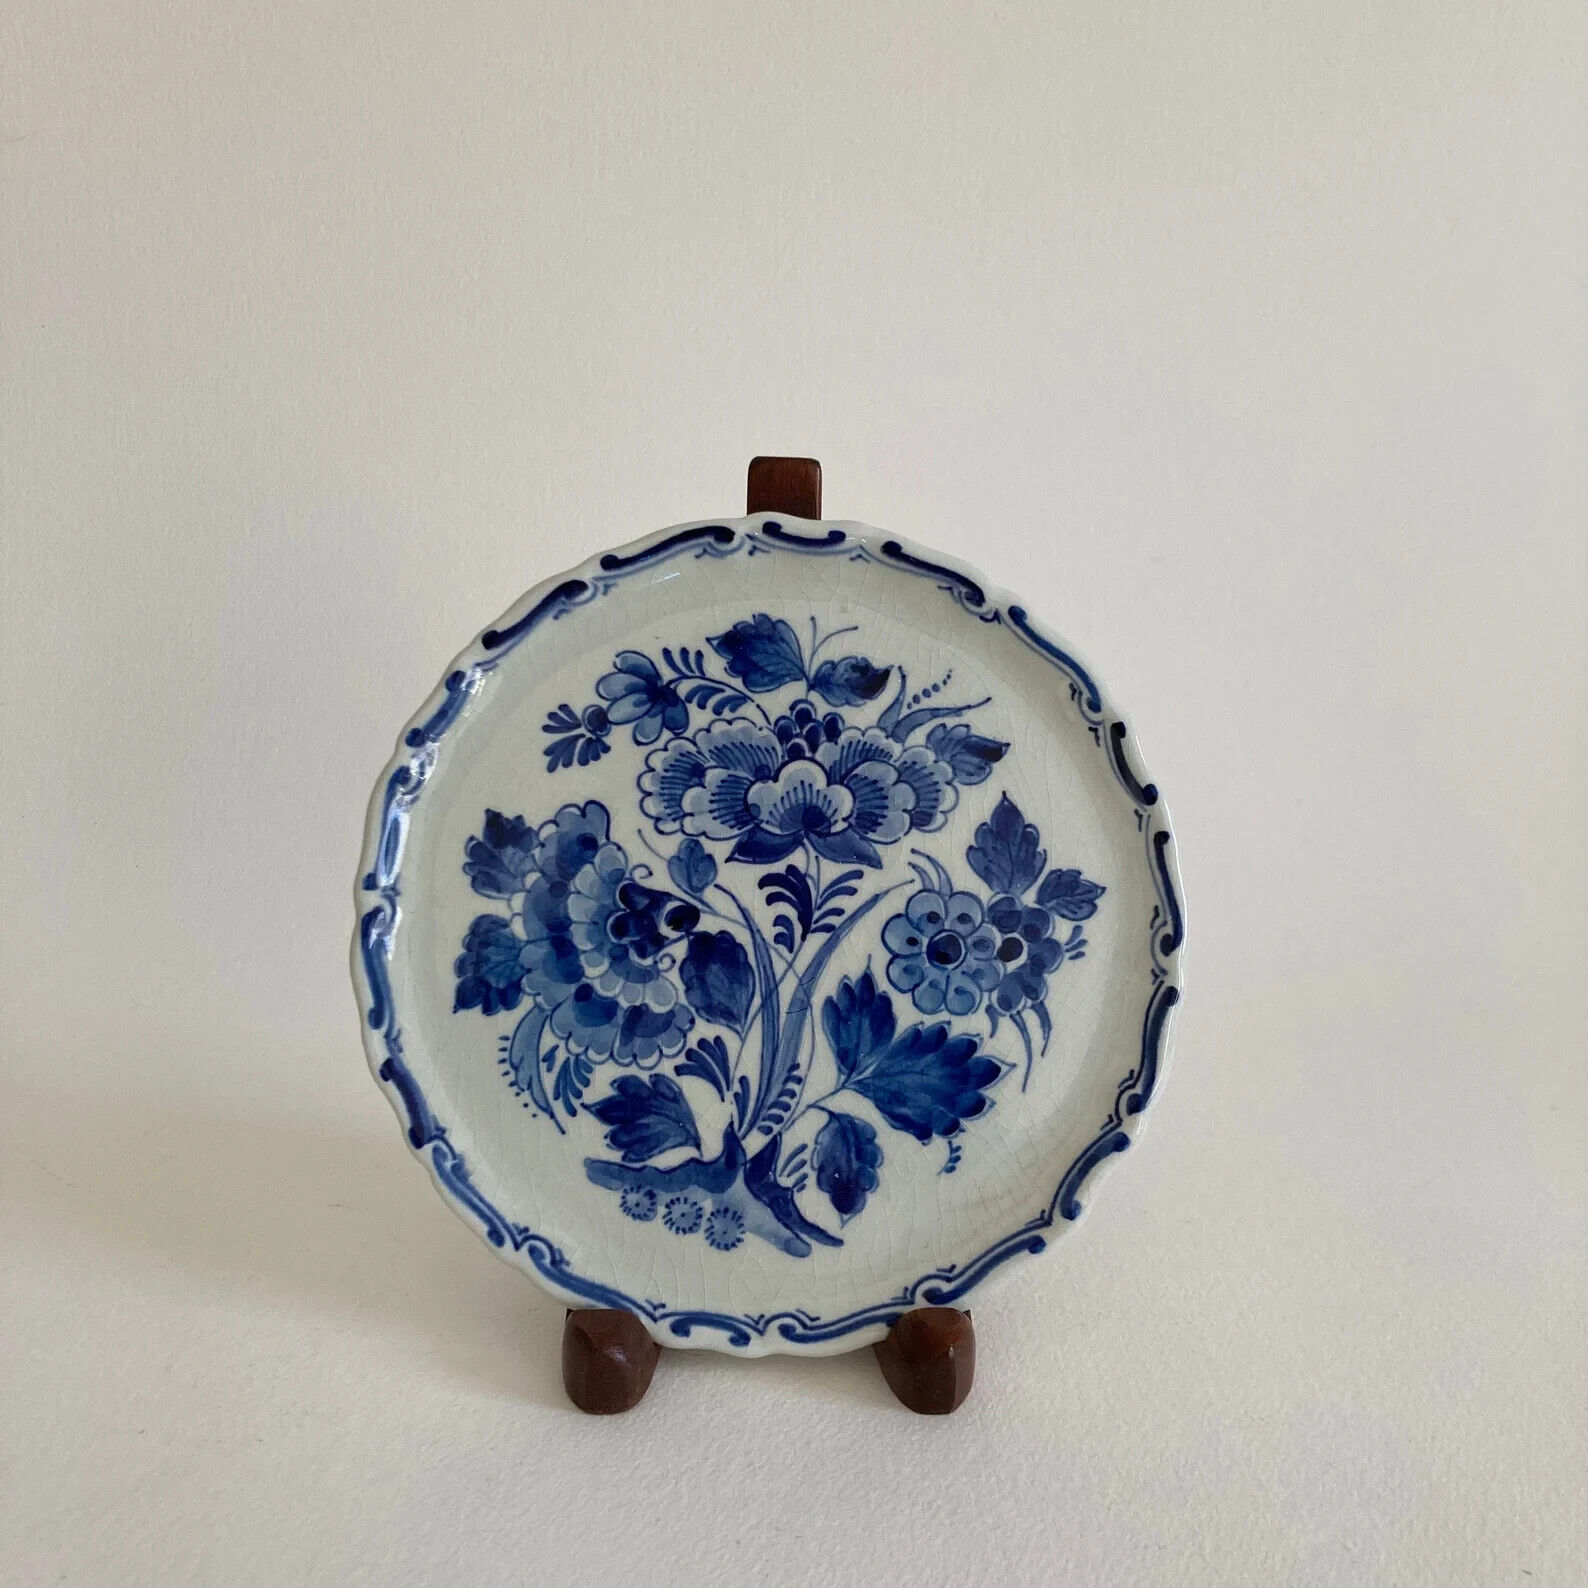 1980s Royal Delft Ceramic Decorative Wall Hanging Plate – Floral Delft Plate